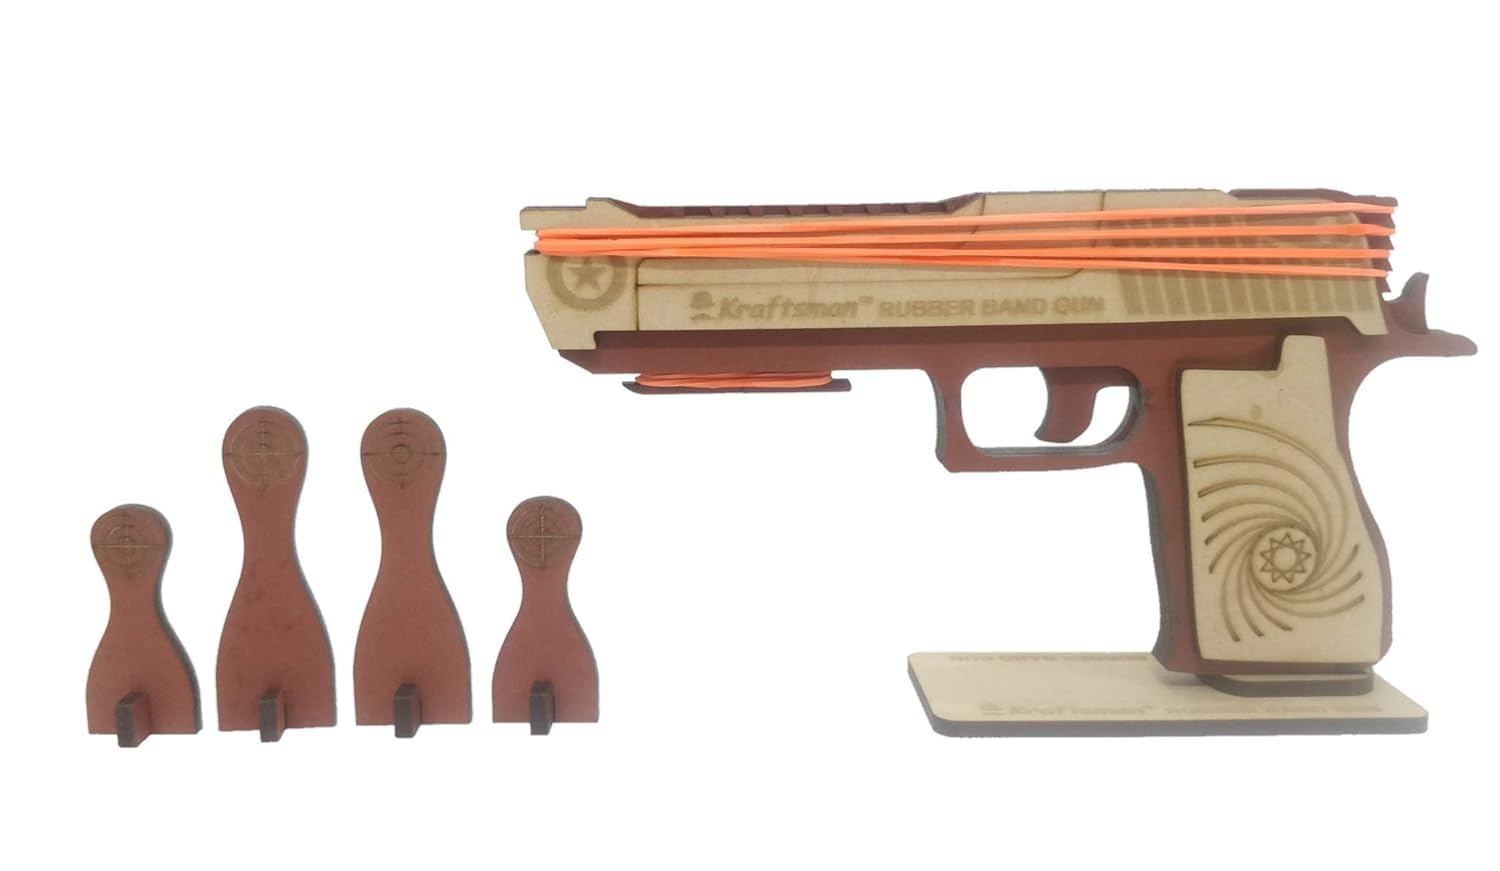 Braintastic Wooden Semi-Automatic Rubber Band Shooting Gun Toys with 5 Rapid Fire Shots for Kids (Beige Brown)